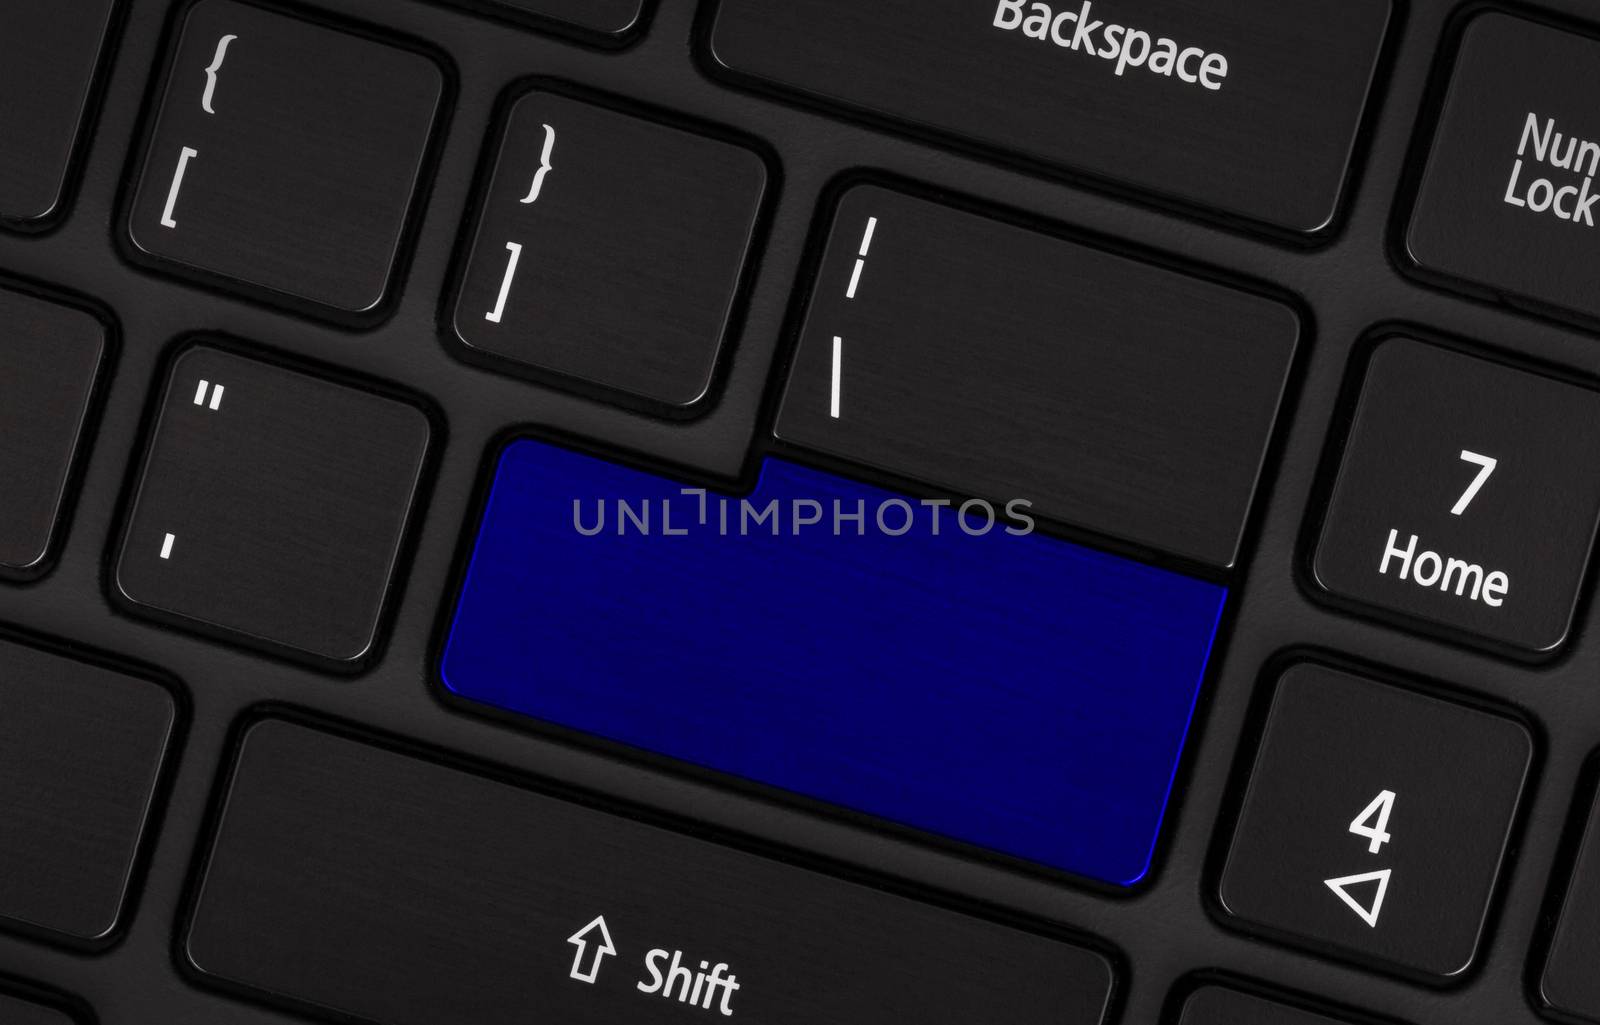 Laptop computer keyboard with blank blue button for text